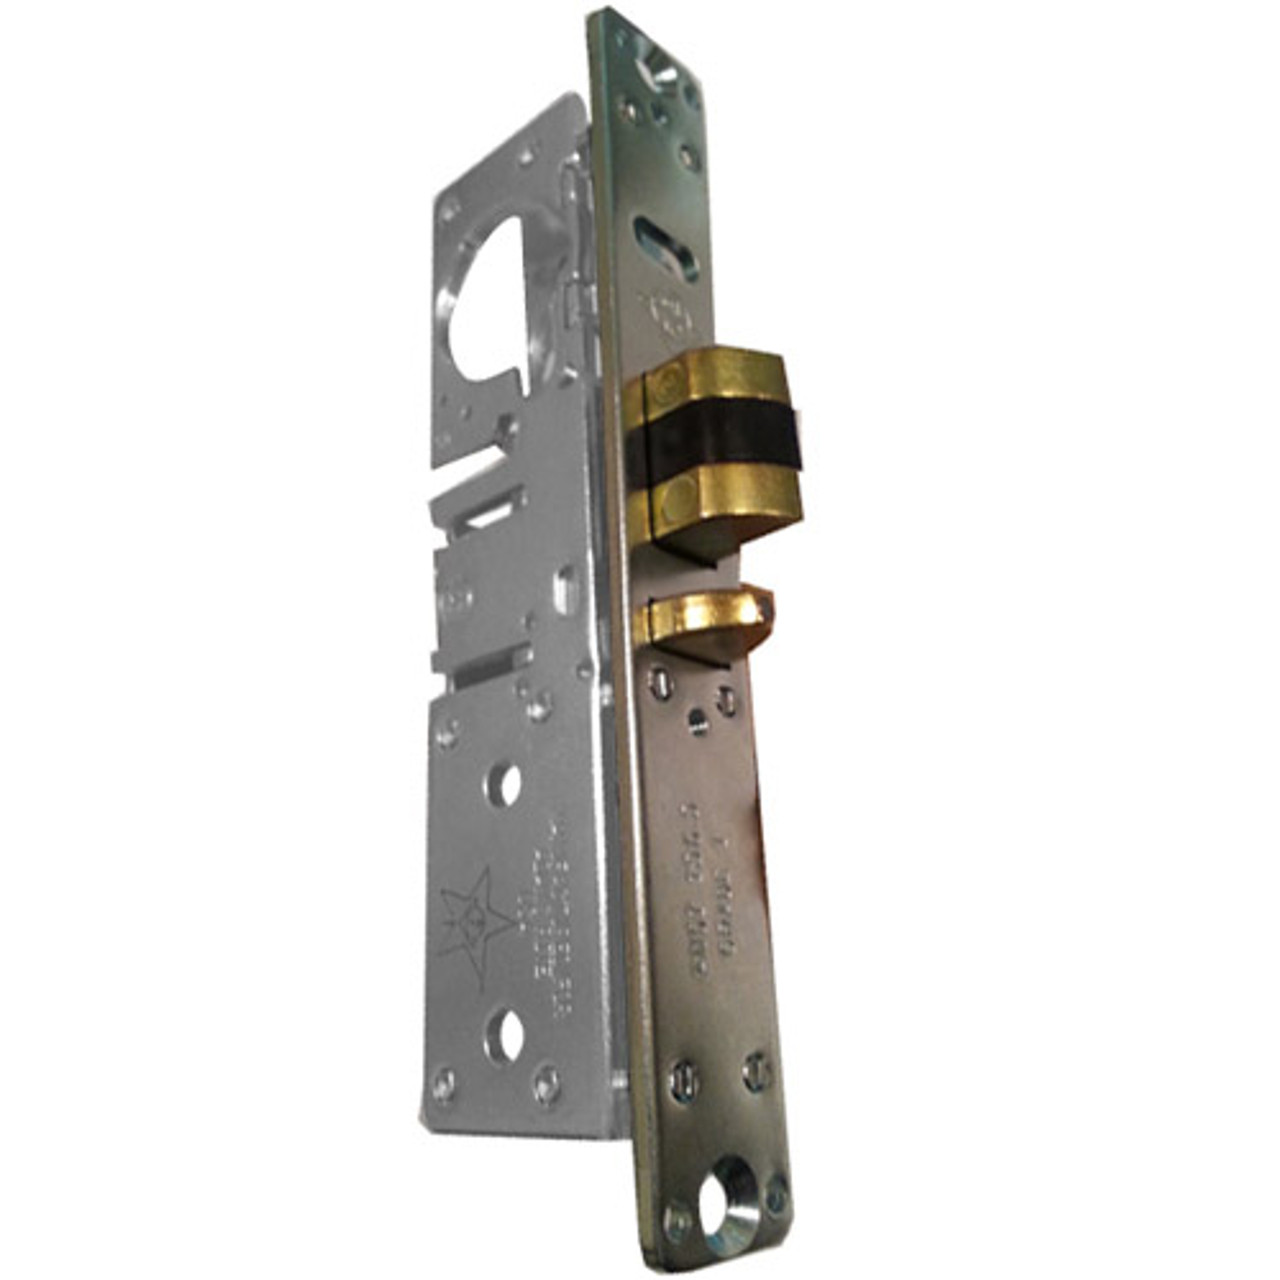 4530-15-221-628 Adams Rite Deadlatch with Flat faceplate in Clear Anodized Finish